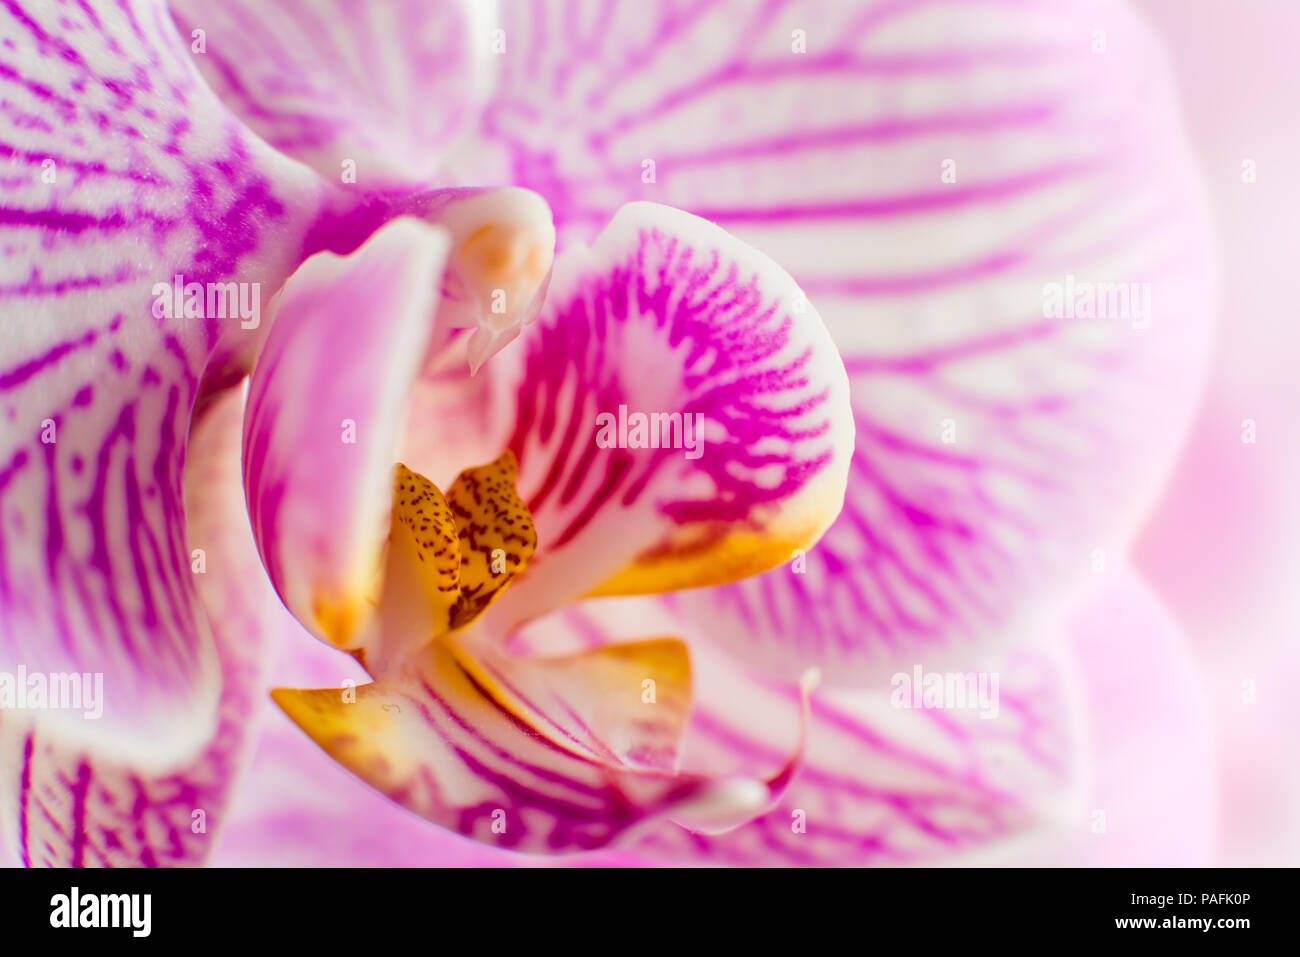 Blume Orchidee Falenopsis, sehr closeup Stockfoto